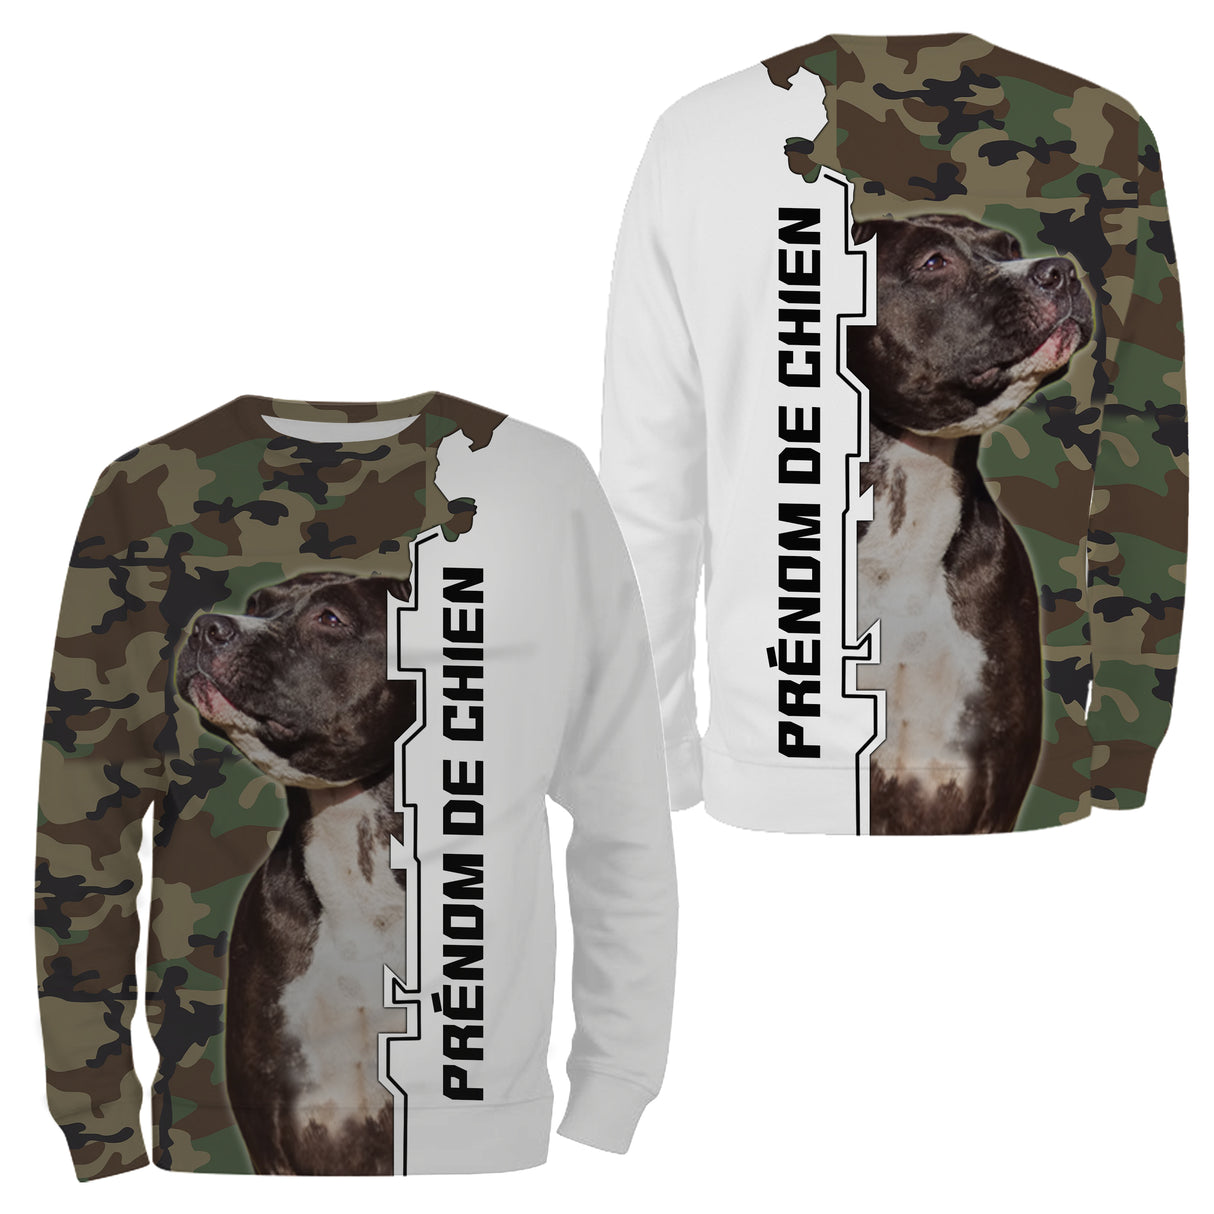 Staffordshire Bull Terrier, Dog Breed Originating from England, T-shirt, Hoodie for Men, Women, Personalized Gift - CTS14042214